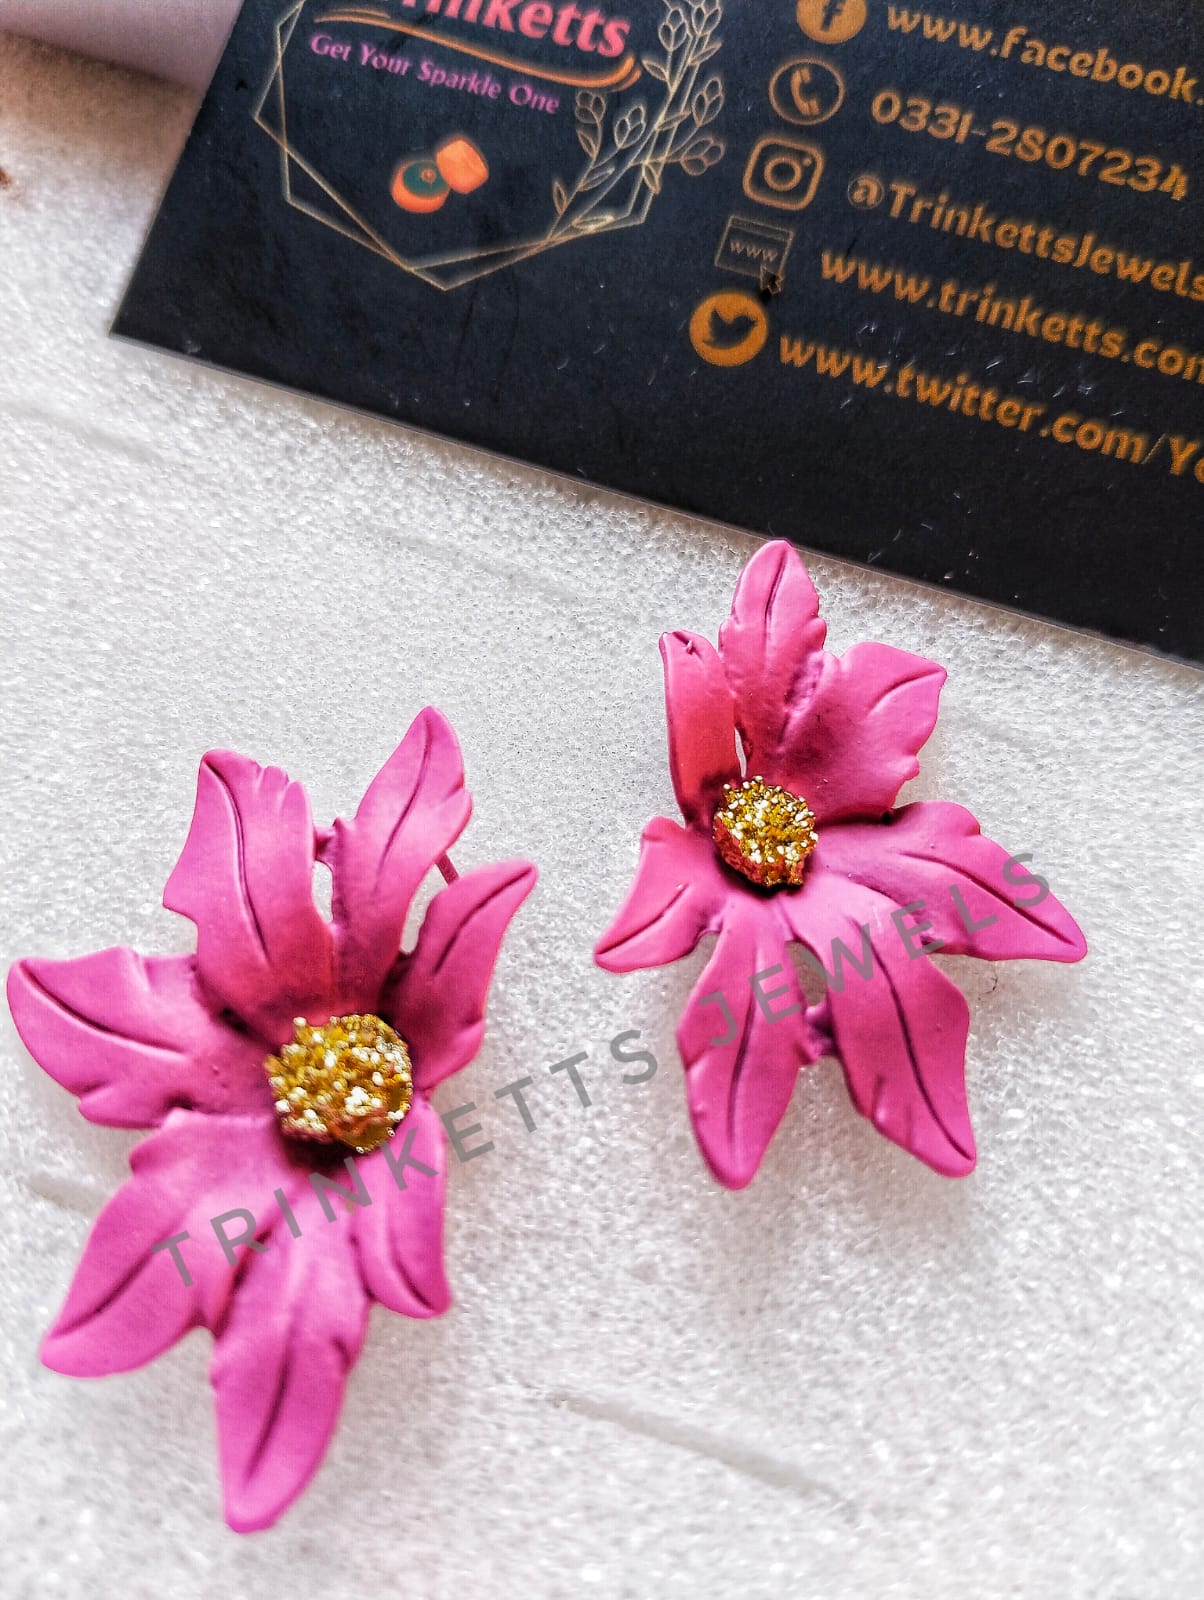 Handcrafted pink clay floral studs with leafy petals and a center rhinestone in copper. Artisanal jewelry, blending nature-inspired design with the warmth of clay craftsmanship.